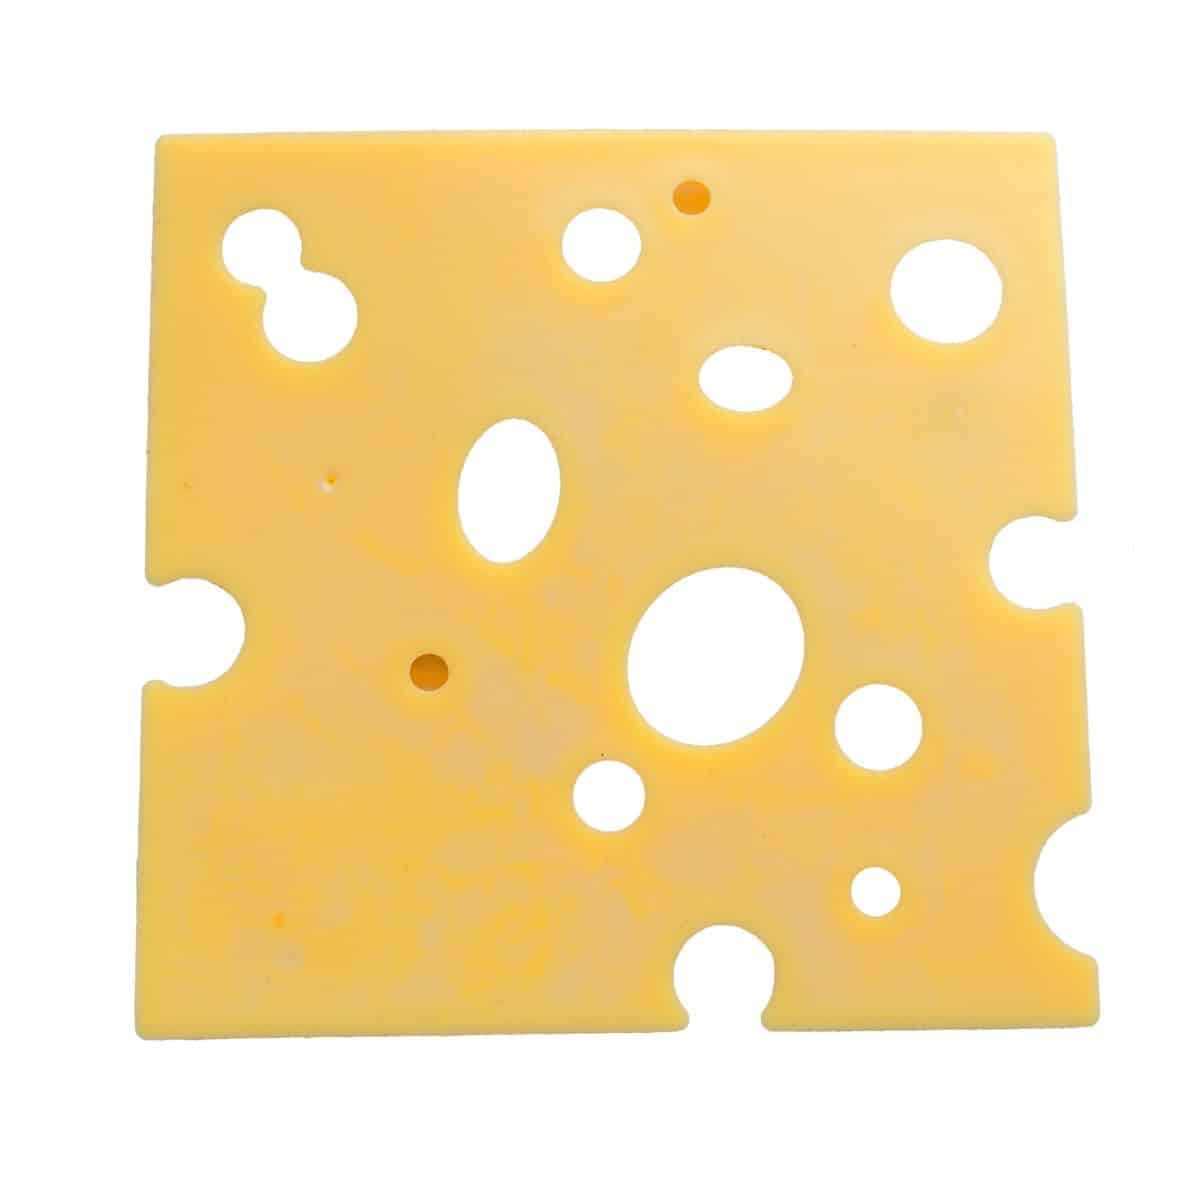 American swiss cheese on a white backgound.